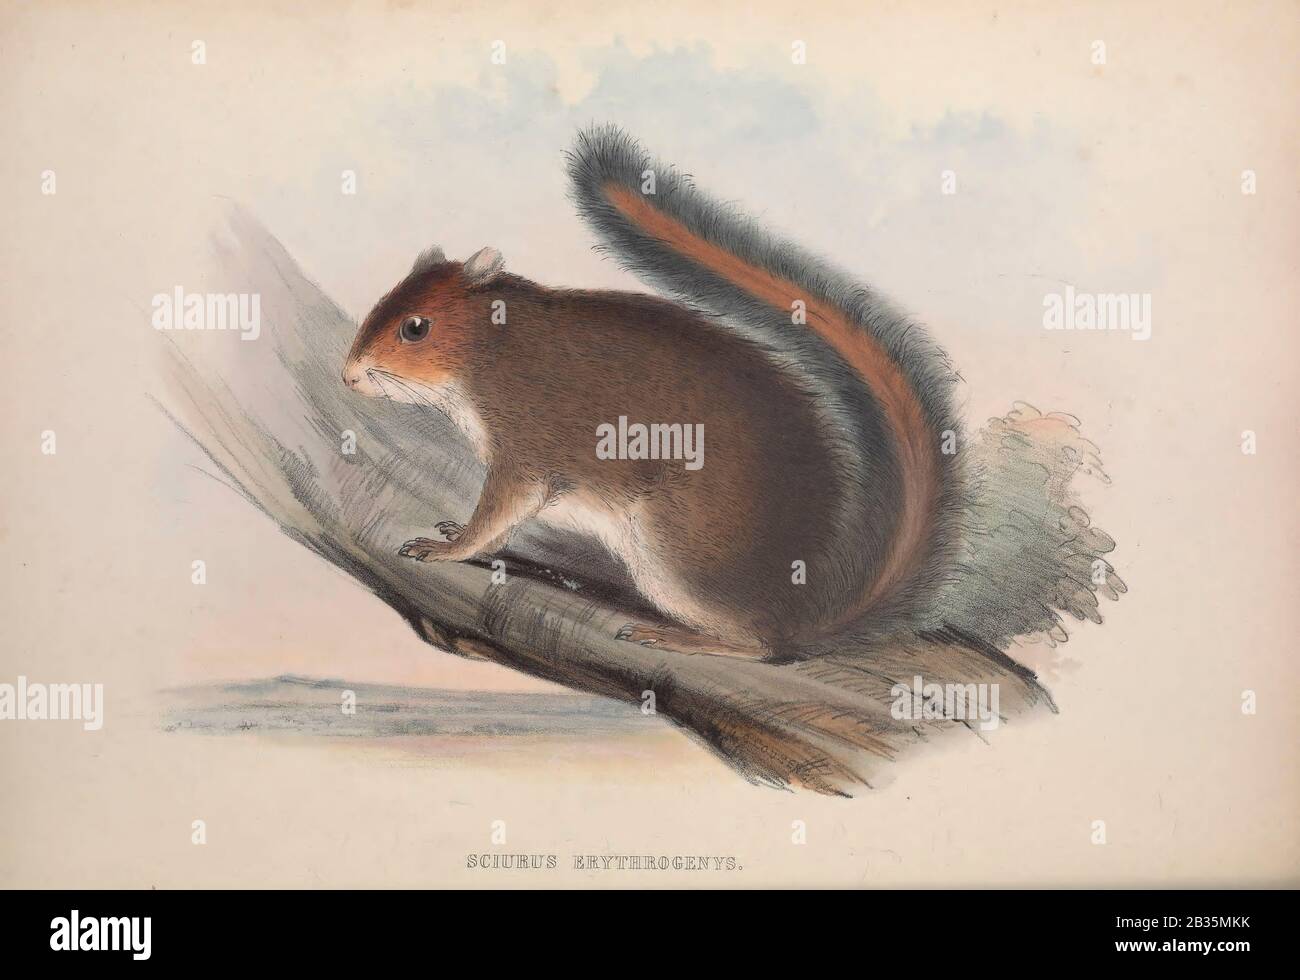 Squirrel From the book Zoologia typica; or, Figures of new and rare animals and birds described in the proceedings, or exhibited in the collections of the Zoological Society of London. By Fraser, Louis. Zoological Society of London. Published by the author in London, March 1847 Stock Photo